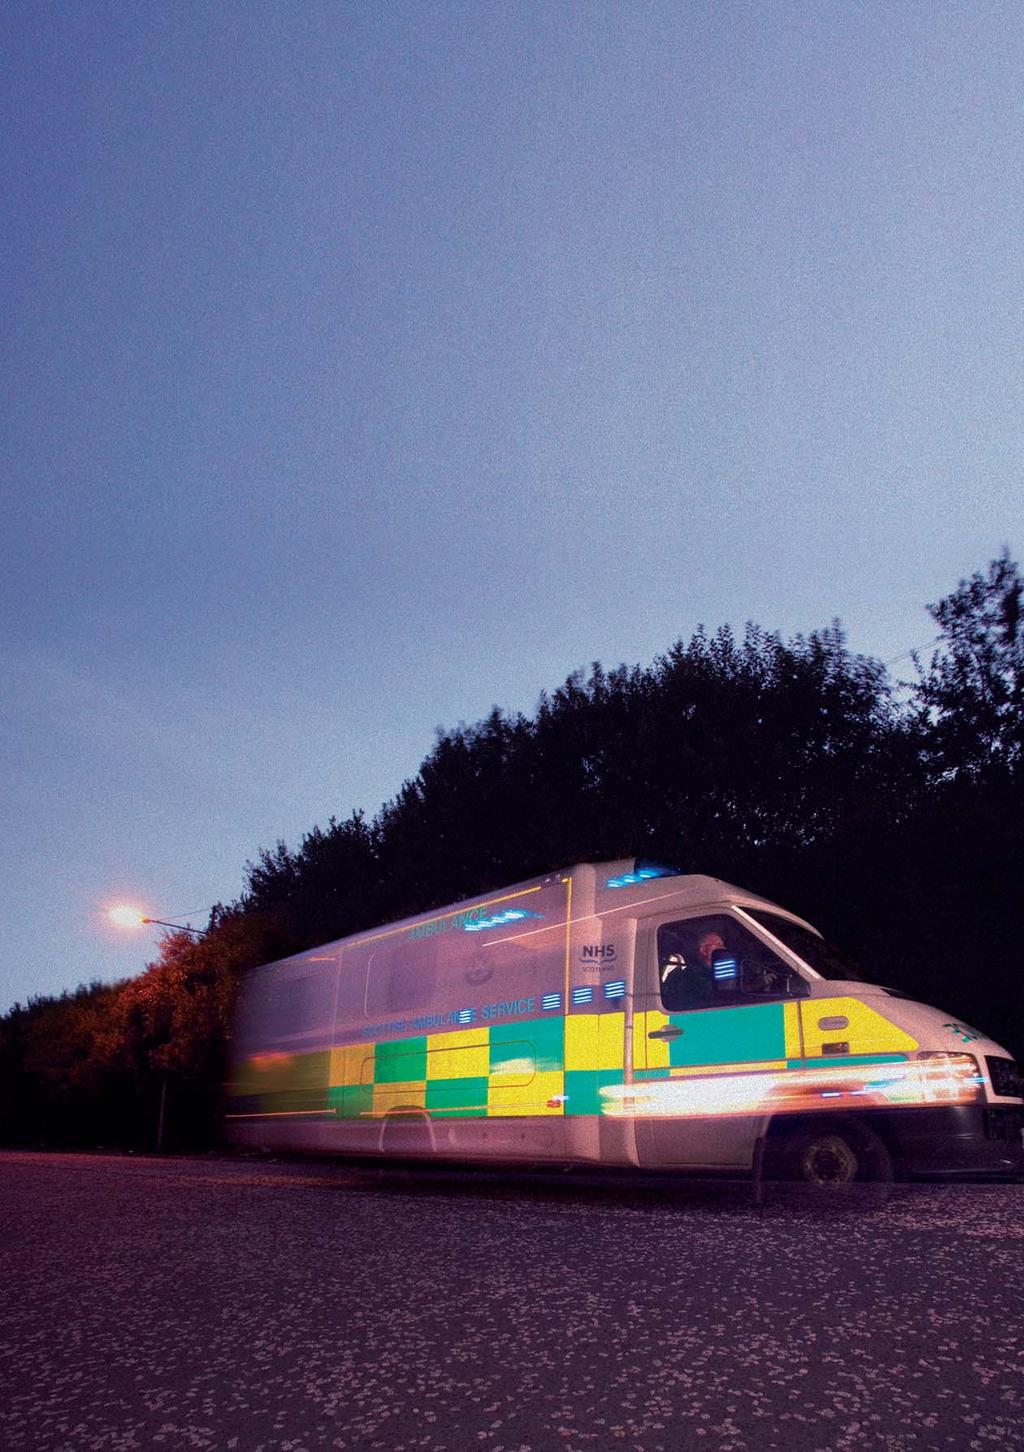 The change in demand for the Scottish Ambulance Service At the frontline of the NHSScotland, the Scottish Ambulance Service (SAS) currently provides an emergency, unscheduled and planned service to